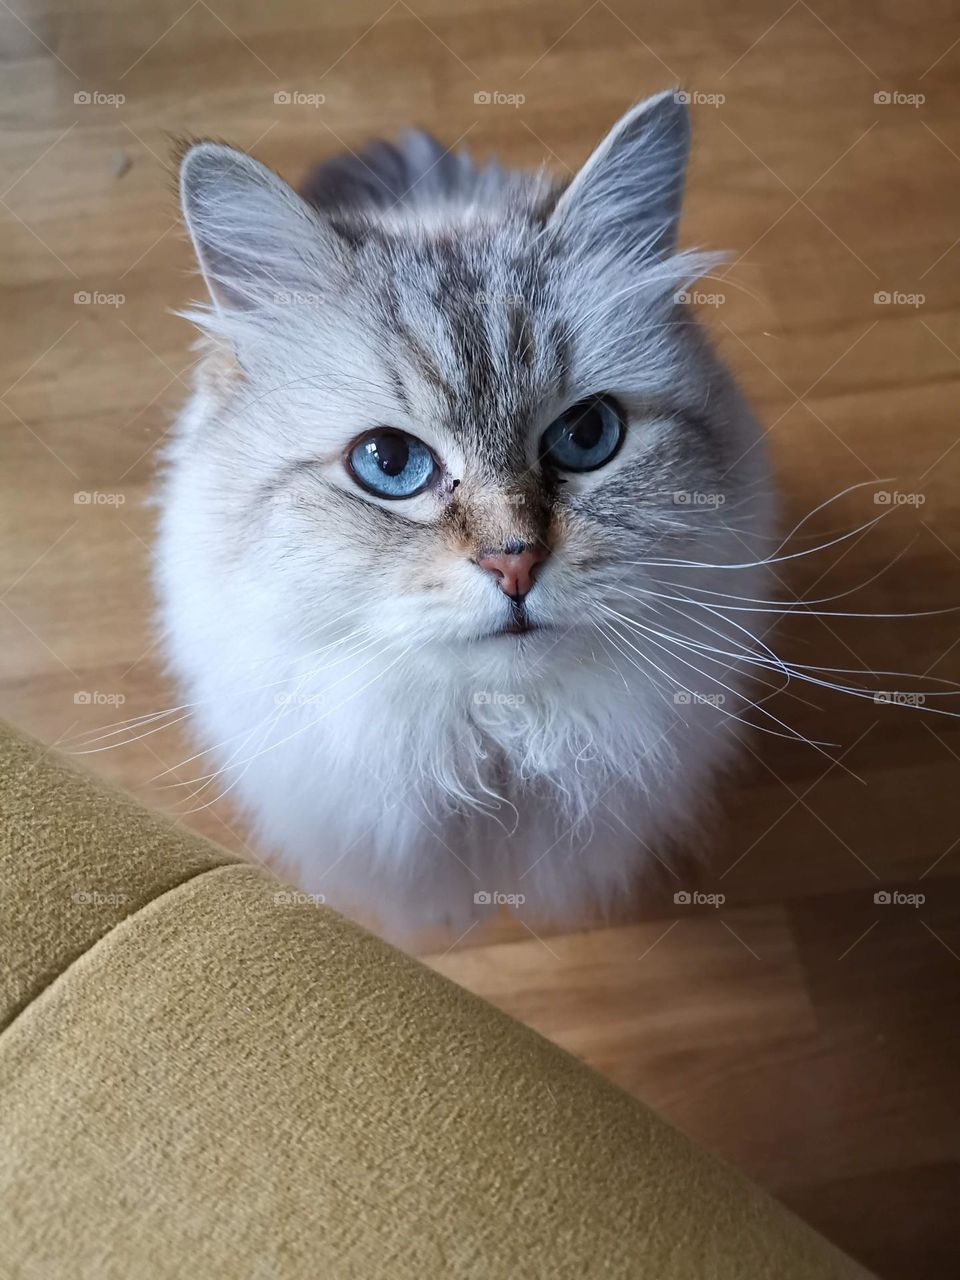 Authentic cat portrait. Beautiful cat with amazing blue eyes. Without any filters and digital retouching.